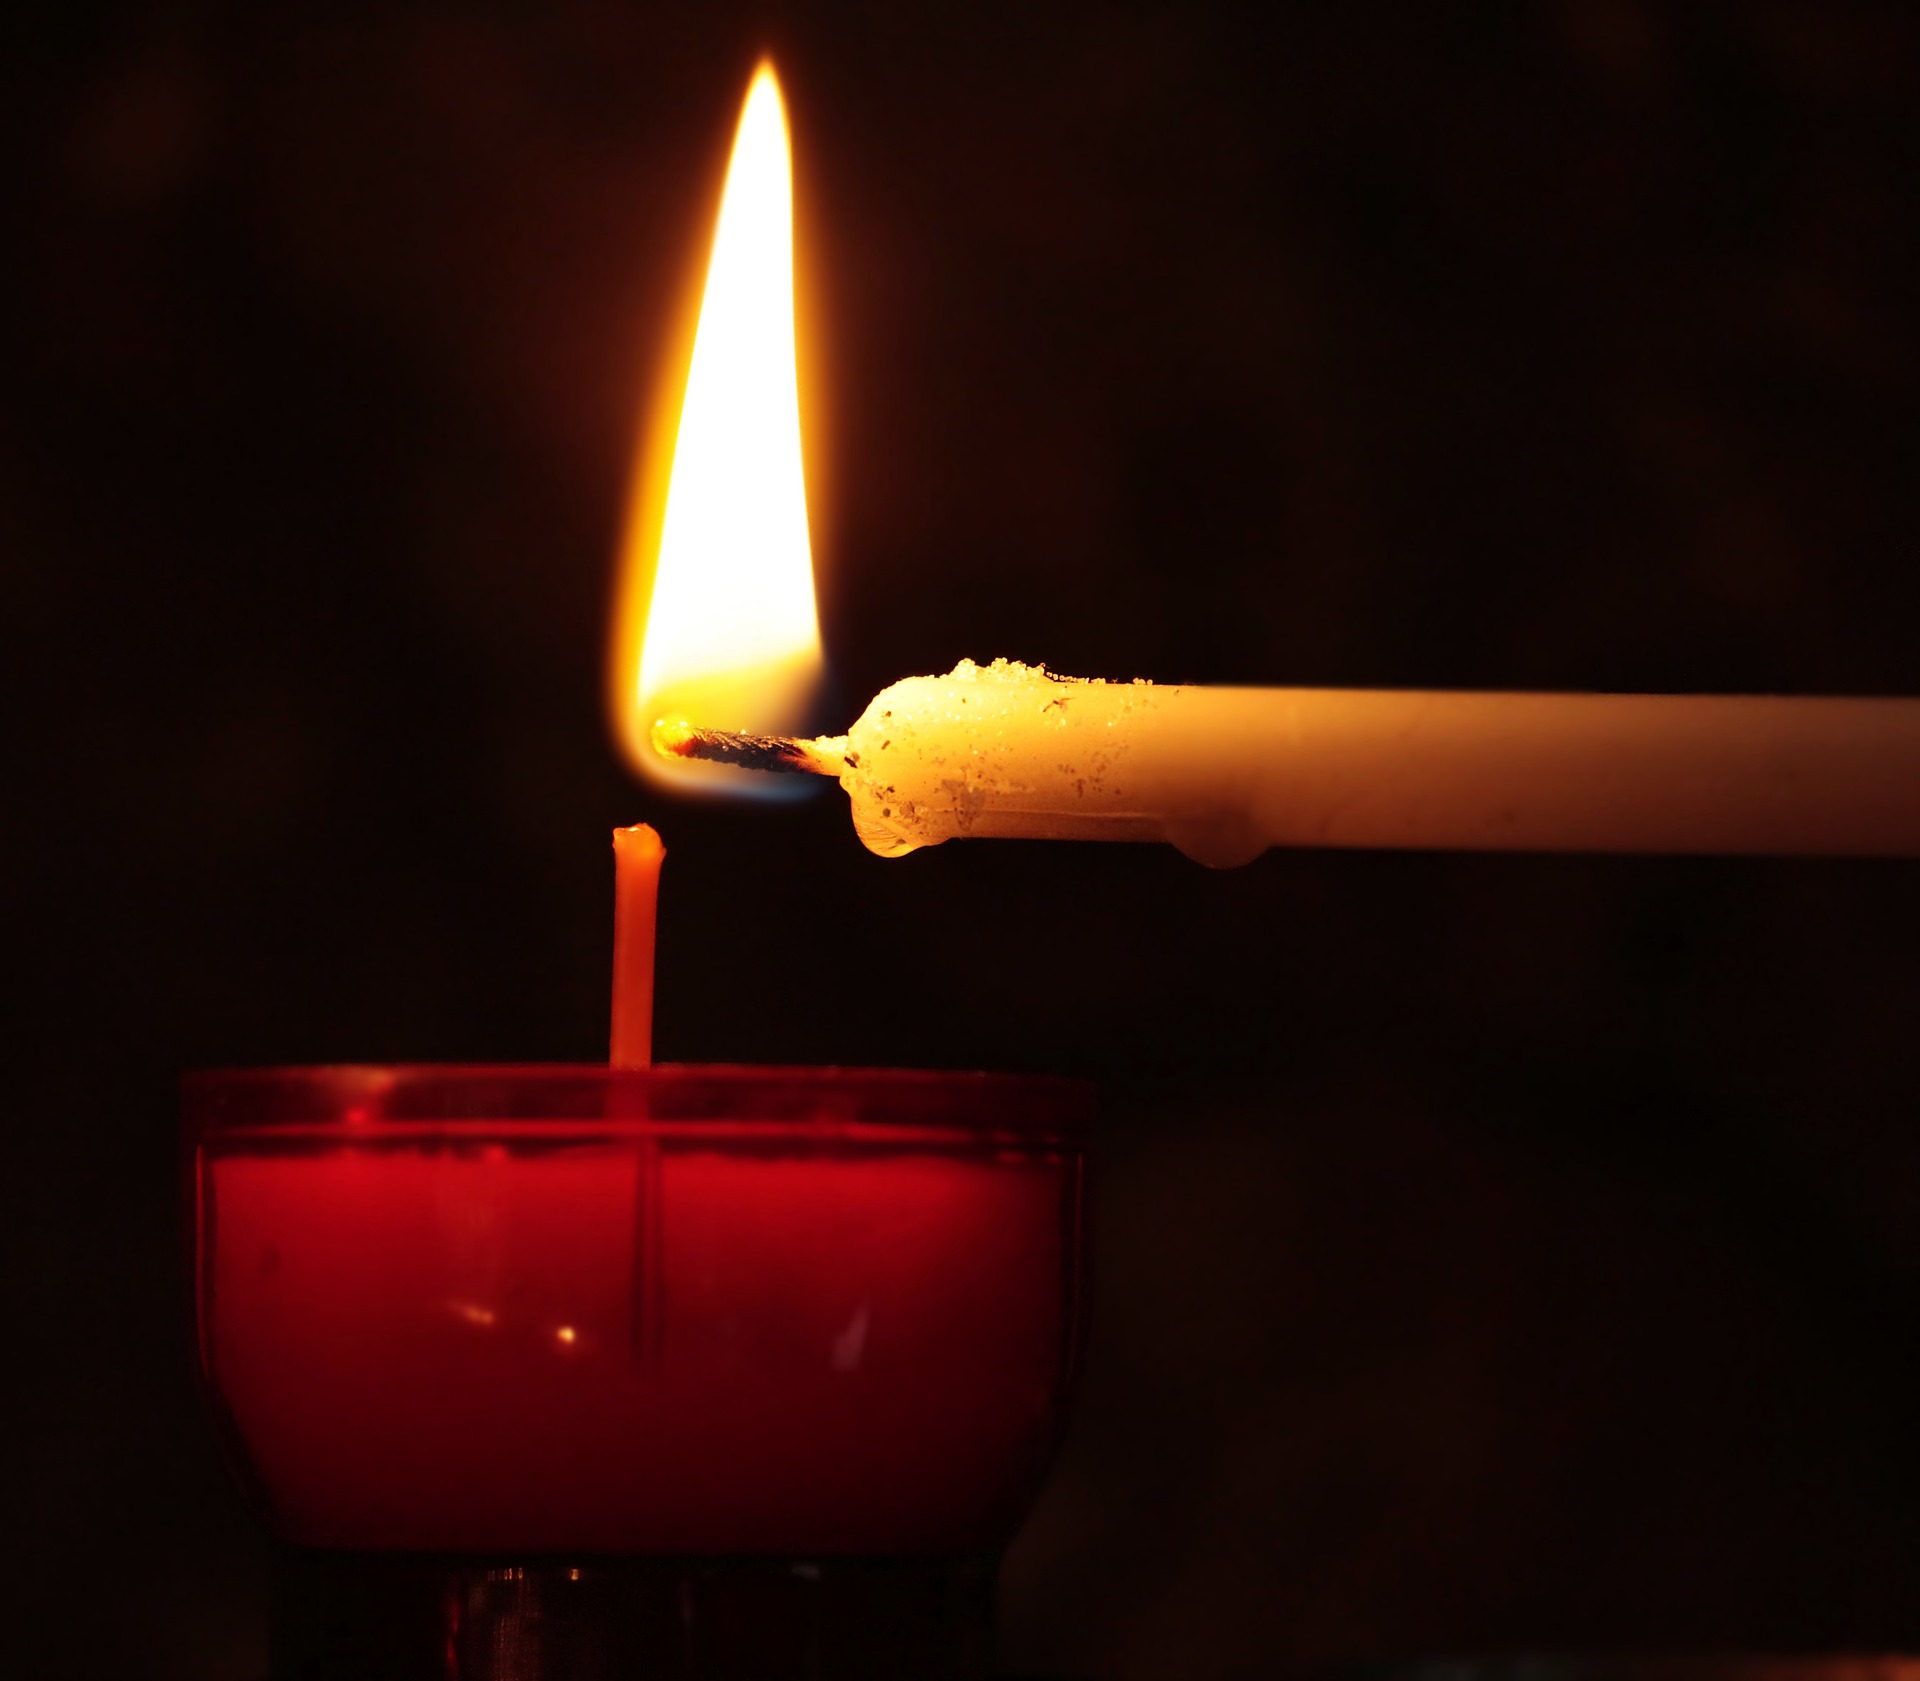 Lit Candle on Scale (1 of 2) - Stock Image - C043/5378 - Science